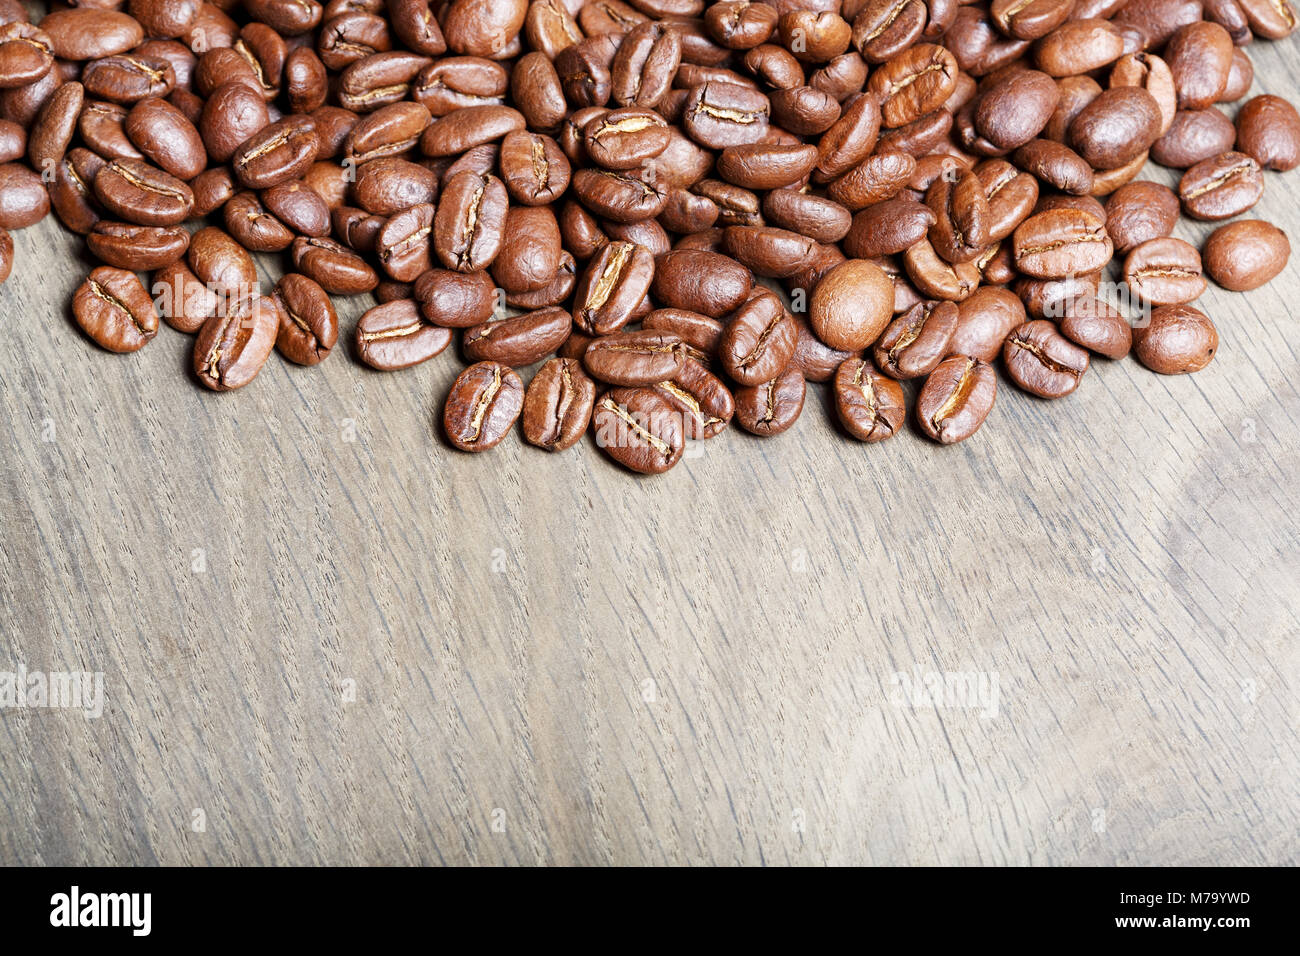 Fresh coffee beans on wood, ready to brew delicious coffee. Stock Photo